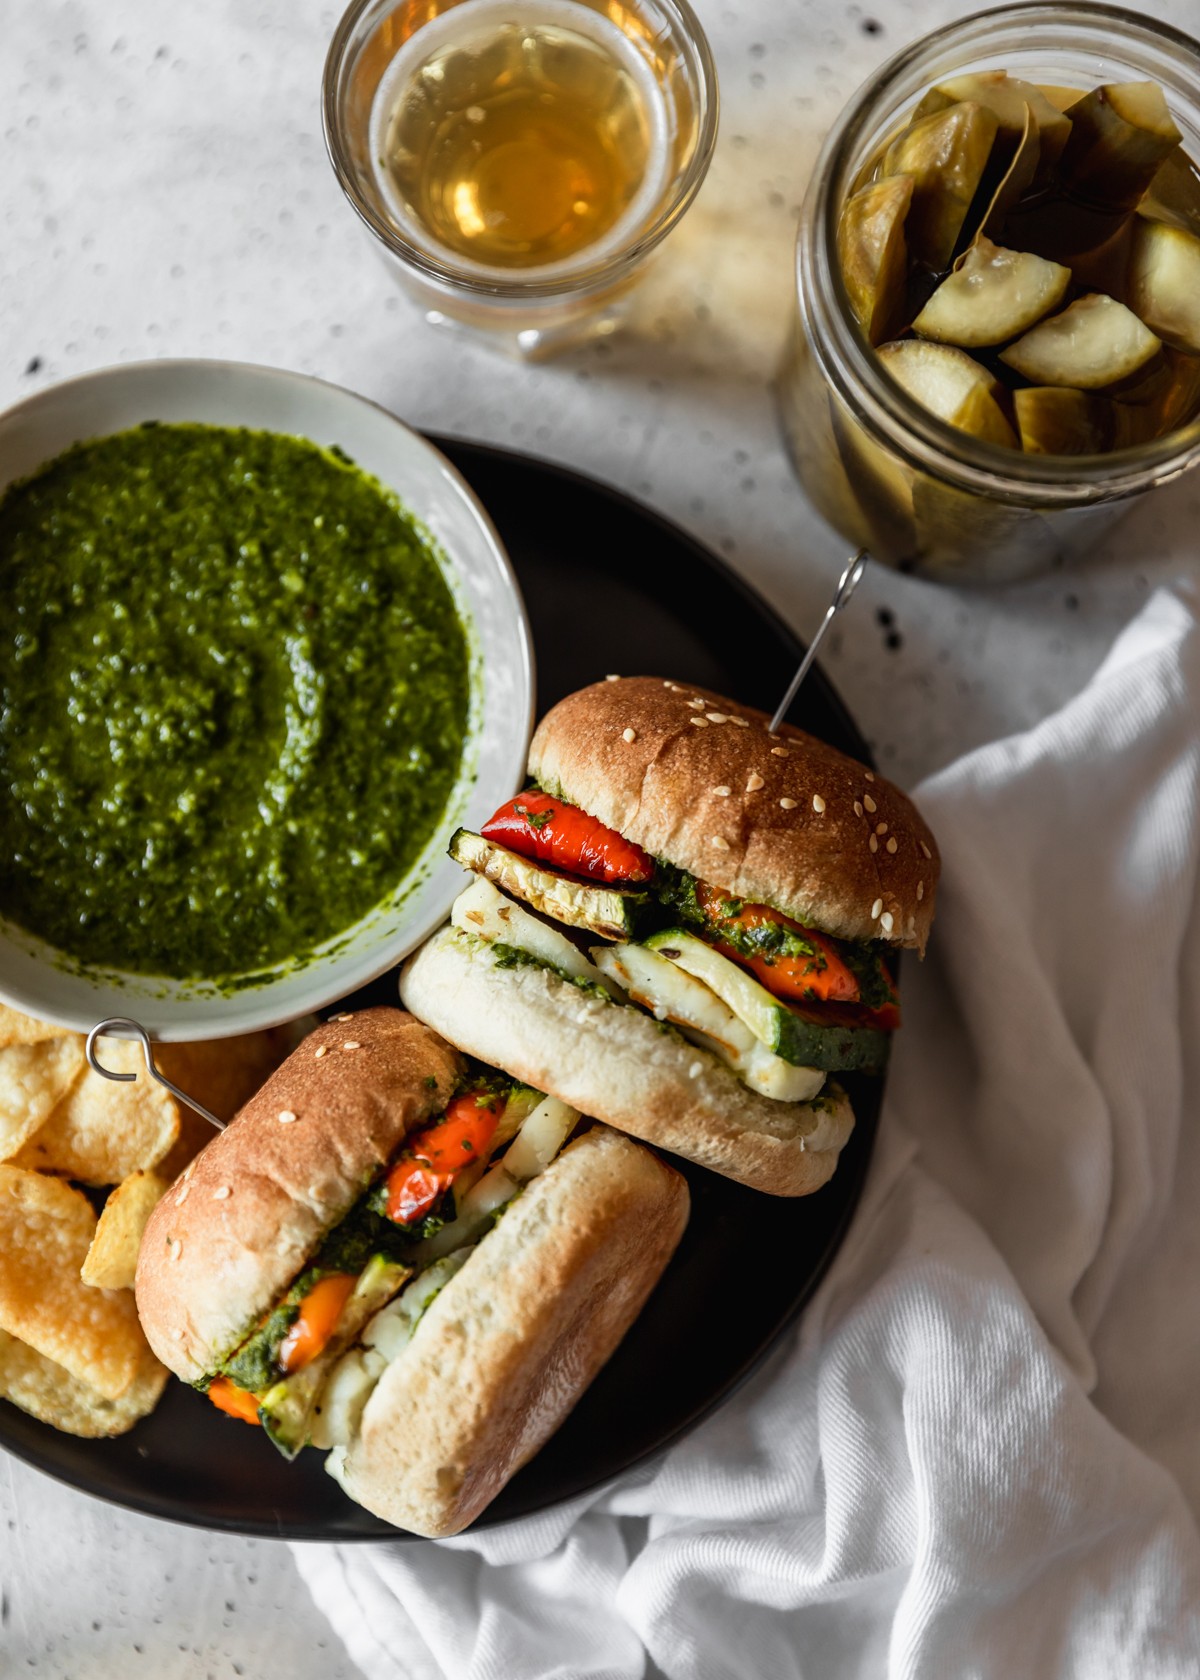 A closeup overhead image of two vegetable and halloumi sandwiches on a black plate next to a grey bowl of herb sauce, a jar of pickles, and a glass of beer. The plate is resting on a white linen with a light grey table as the background.